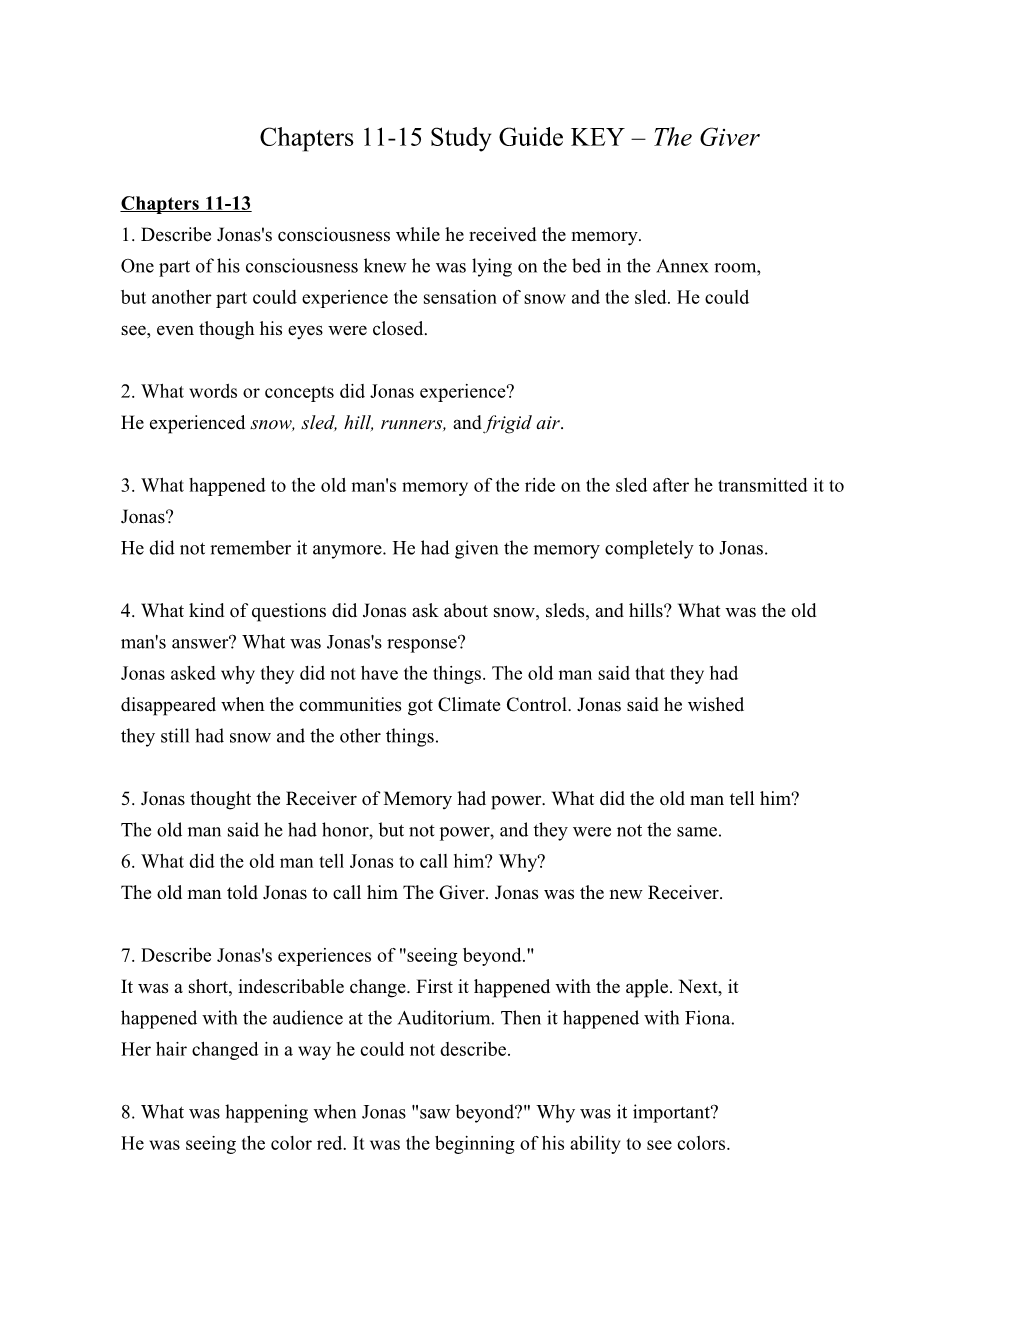 Chapters 11-15 Study Guide KEY the Giver